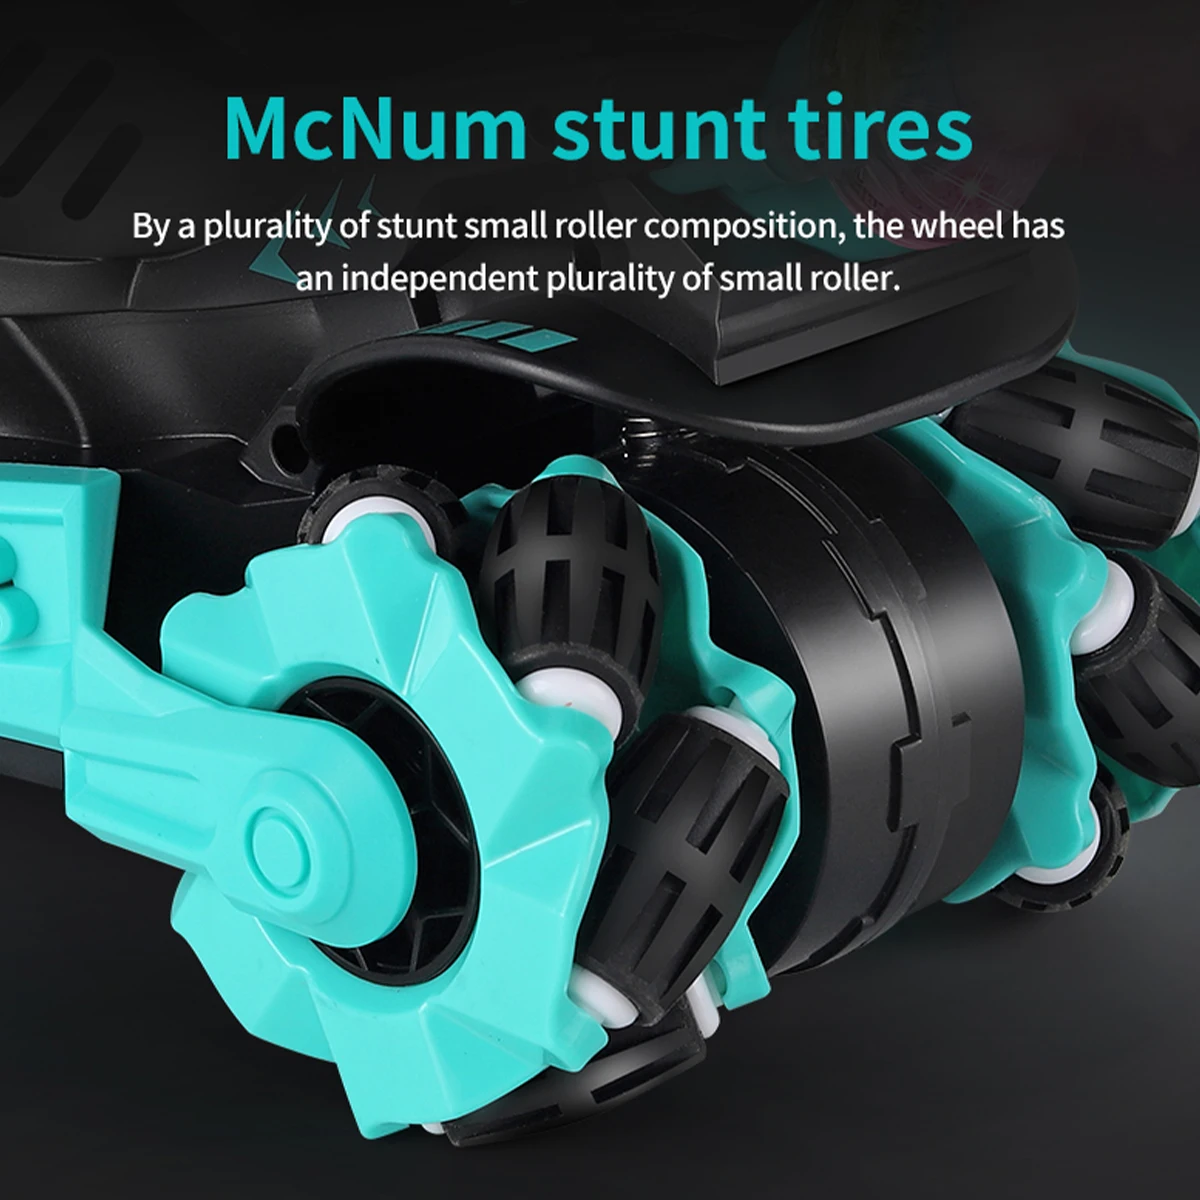 monster truck remote control car Spray RC Motorcycle Drift with Water Mist and Sound Light Effect Jet RC Motorbike Toy 360° Rotation 2.4G RC Drift Racing Motorcy remote control racing car